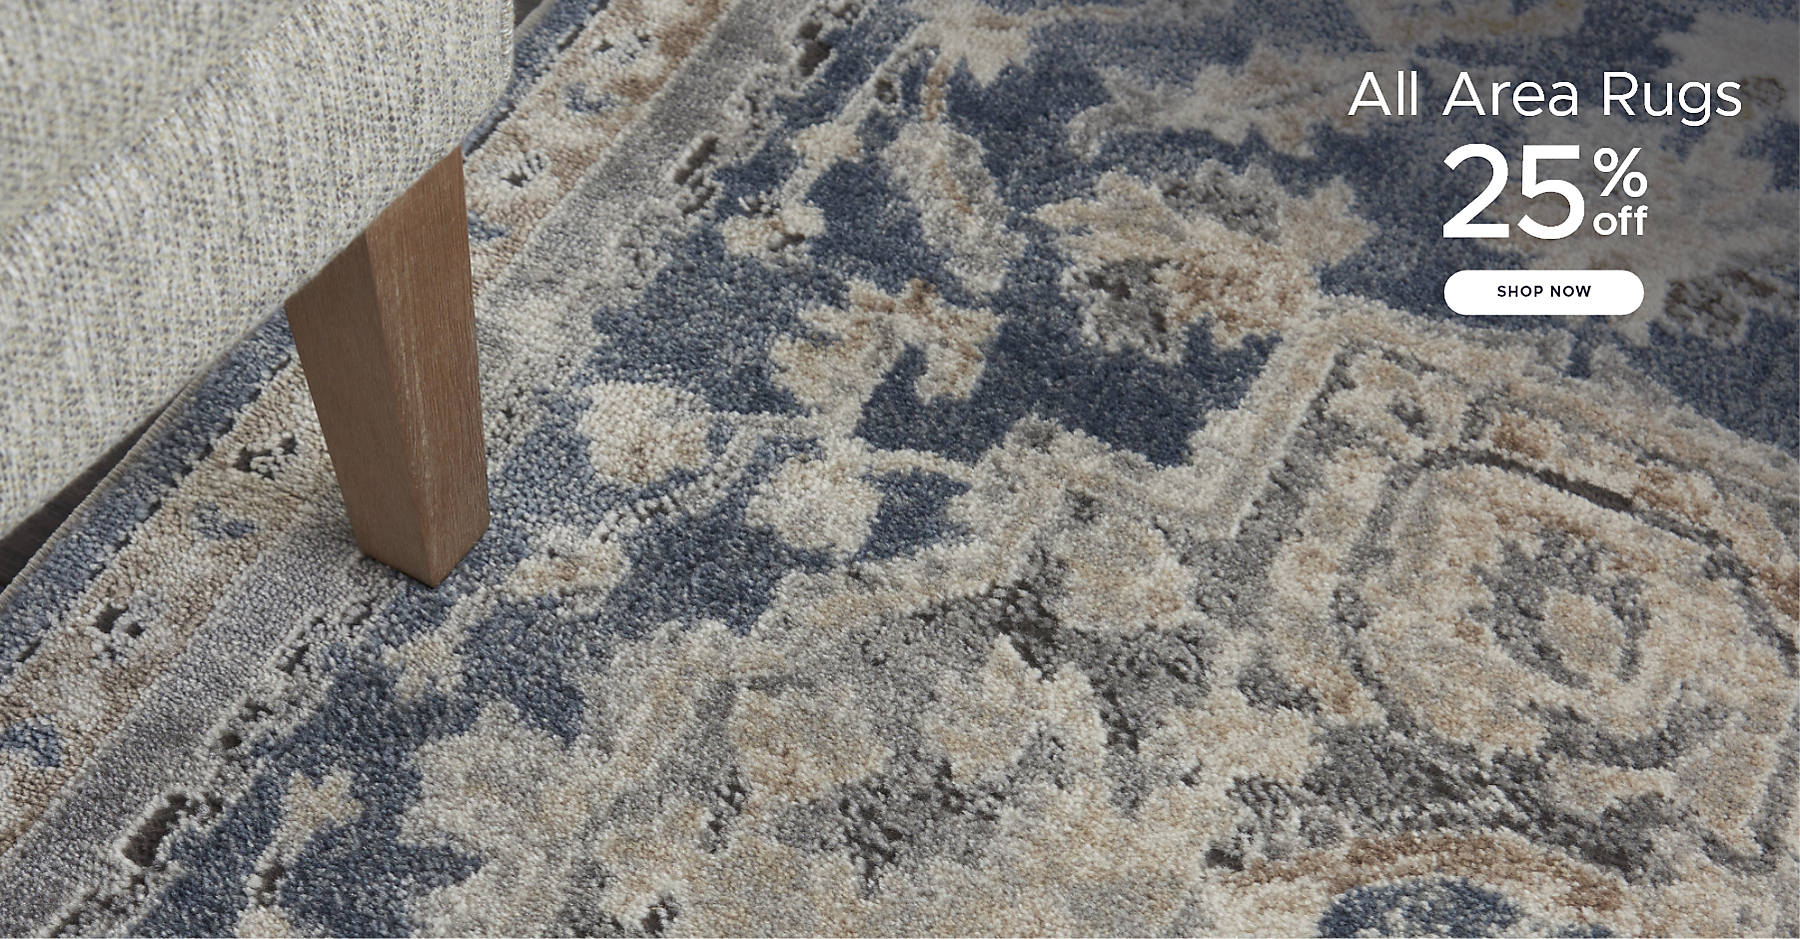 All Area Rugs 25% off shop now